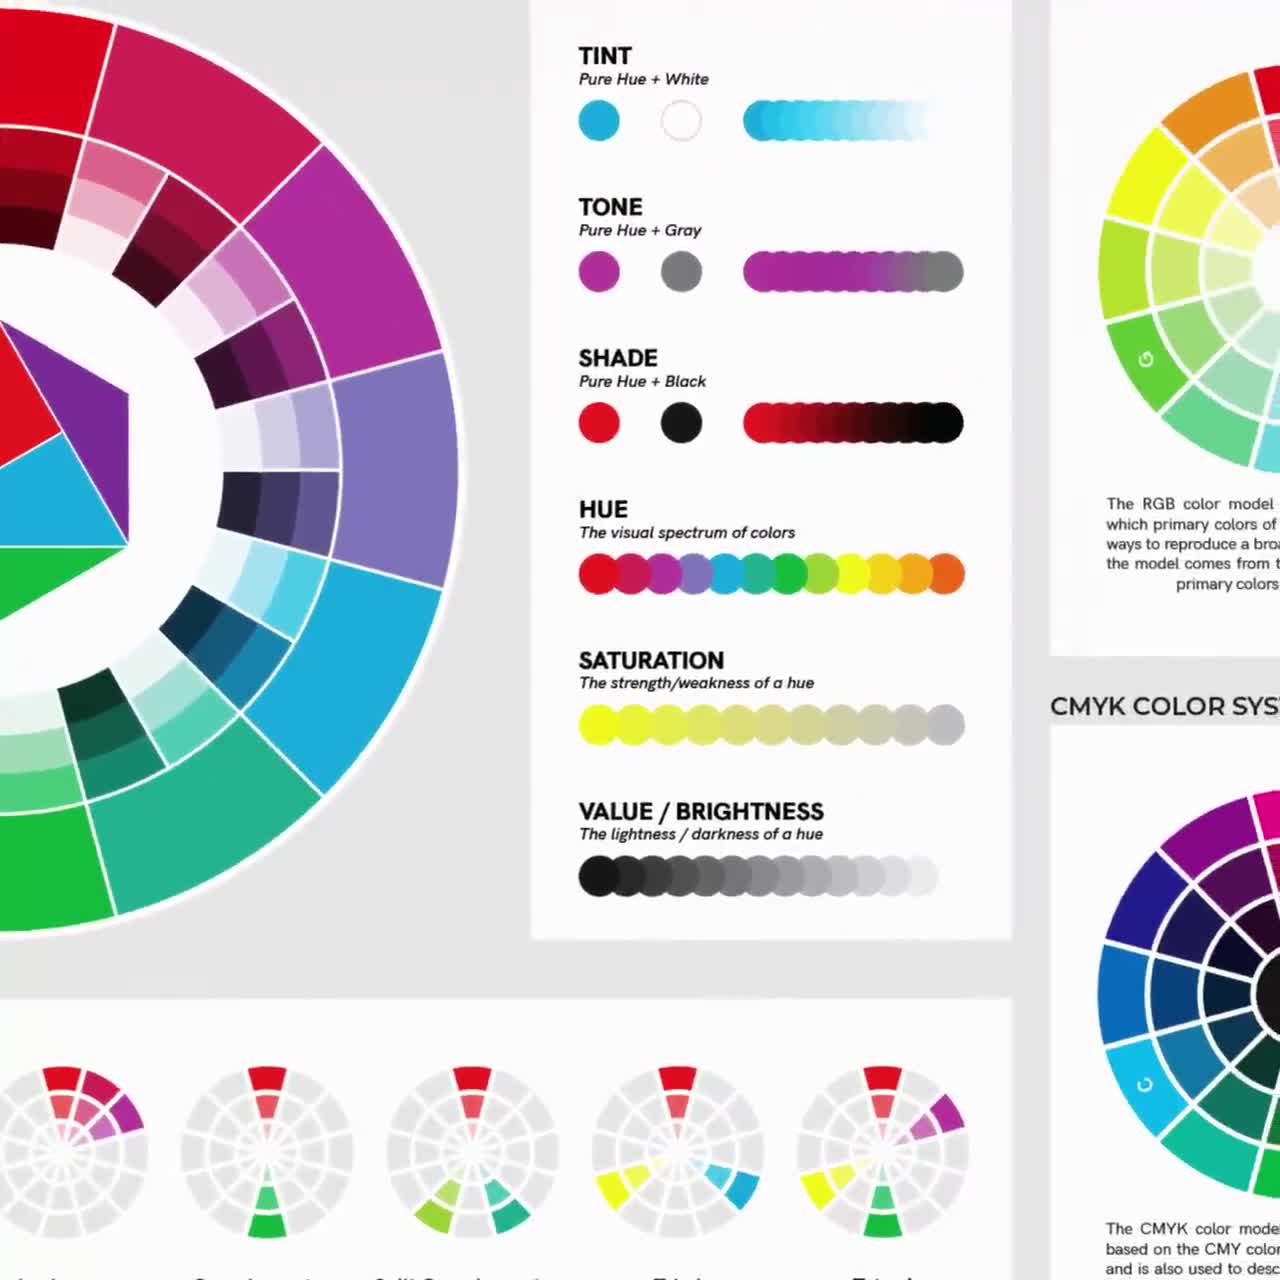 Color Count and Discover CMY Wheel Poster US